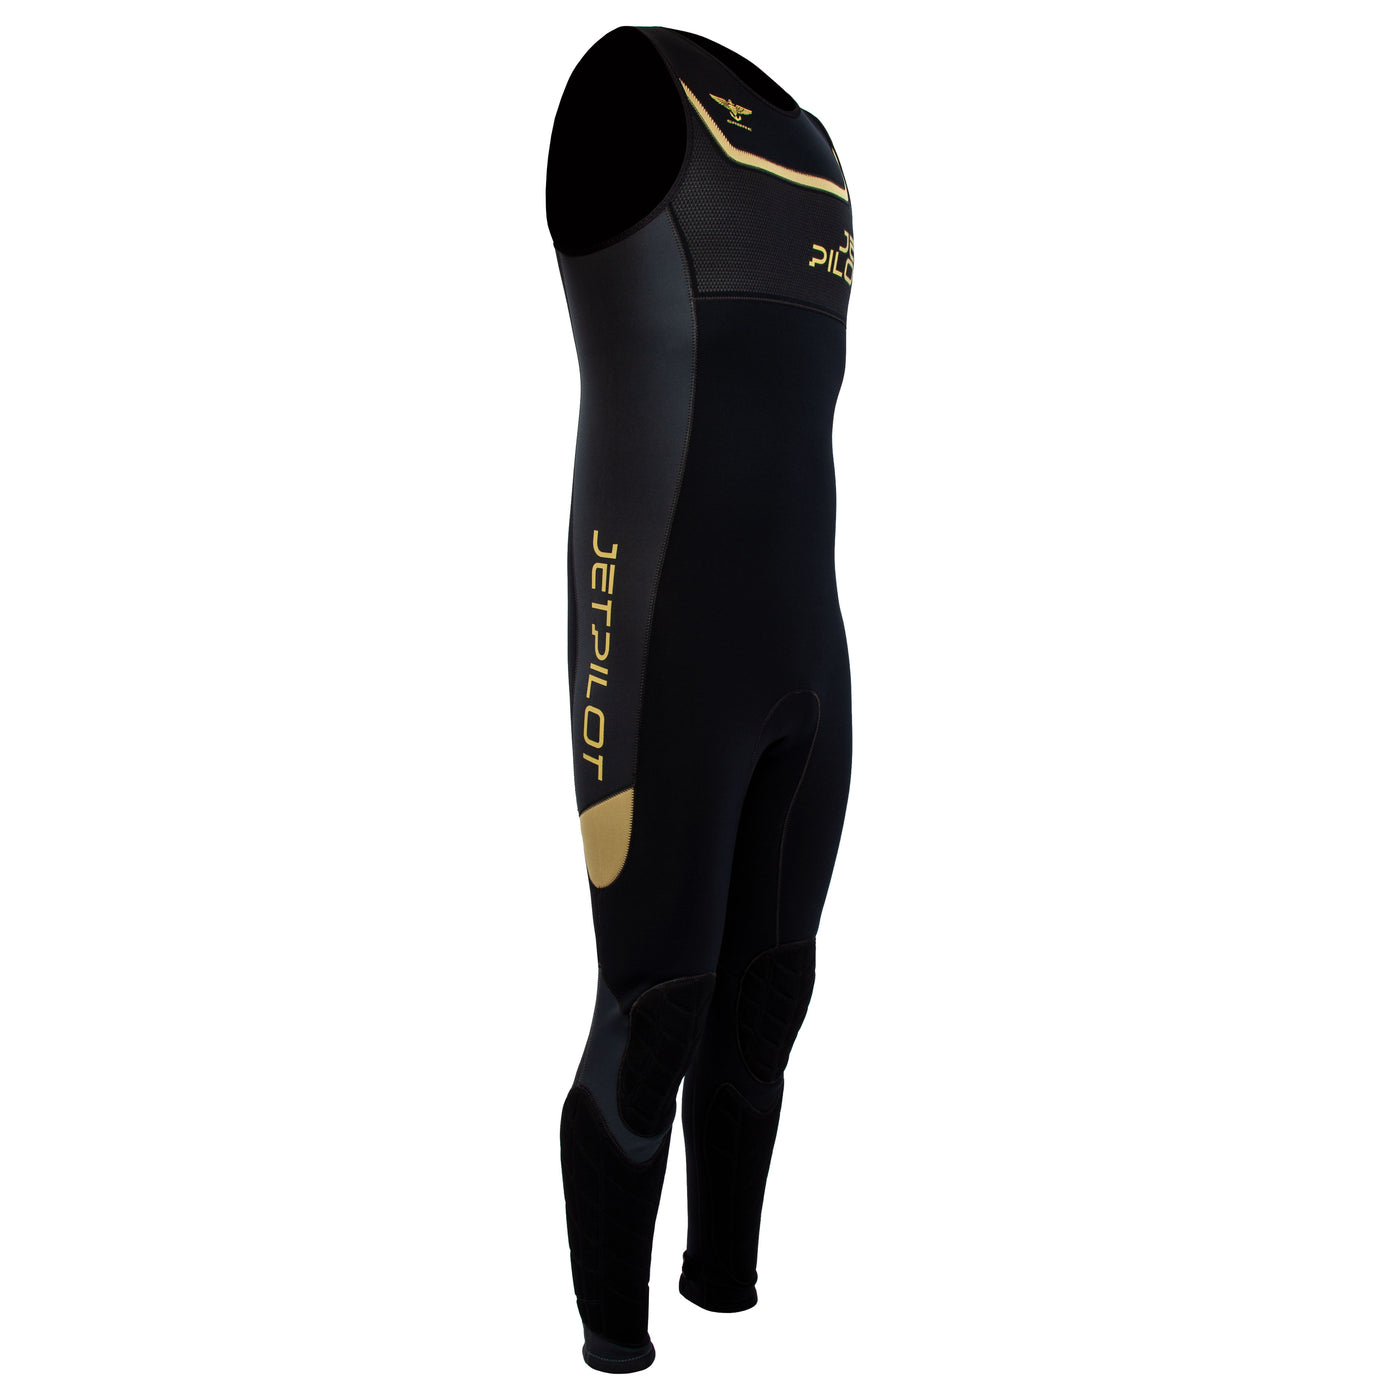 Side view of the Jetpilot F-86 Sabre John wetsuit Black Gold colorway.